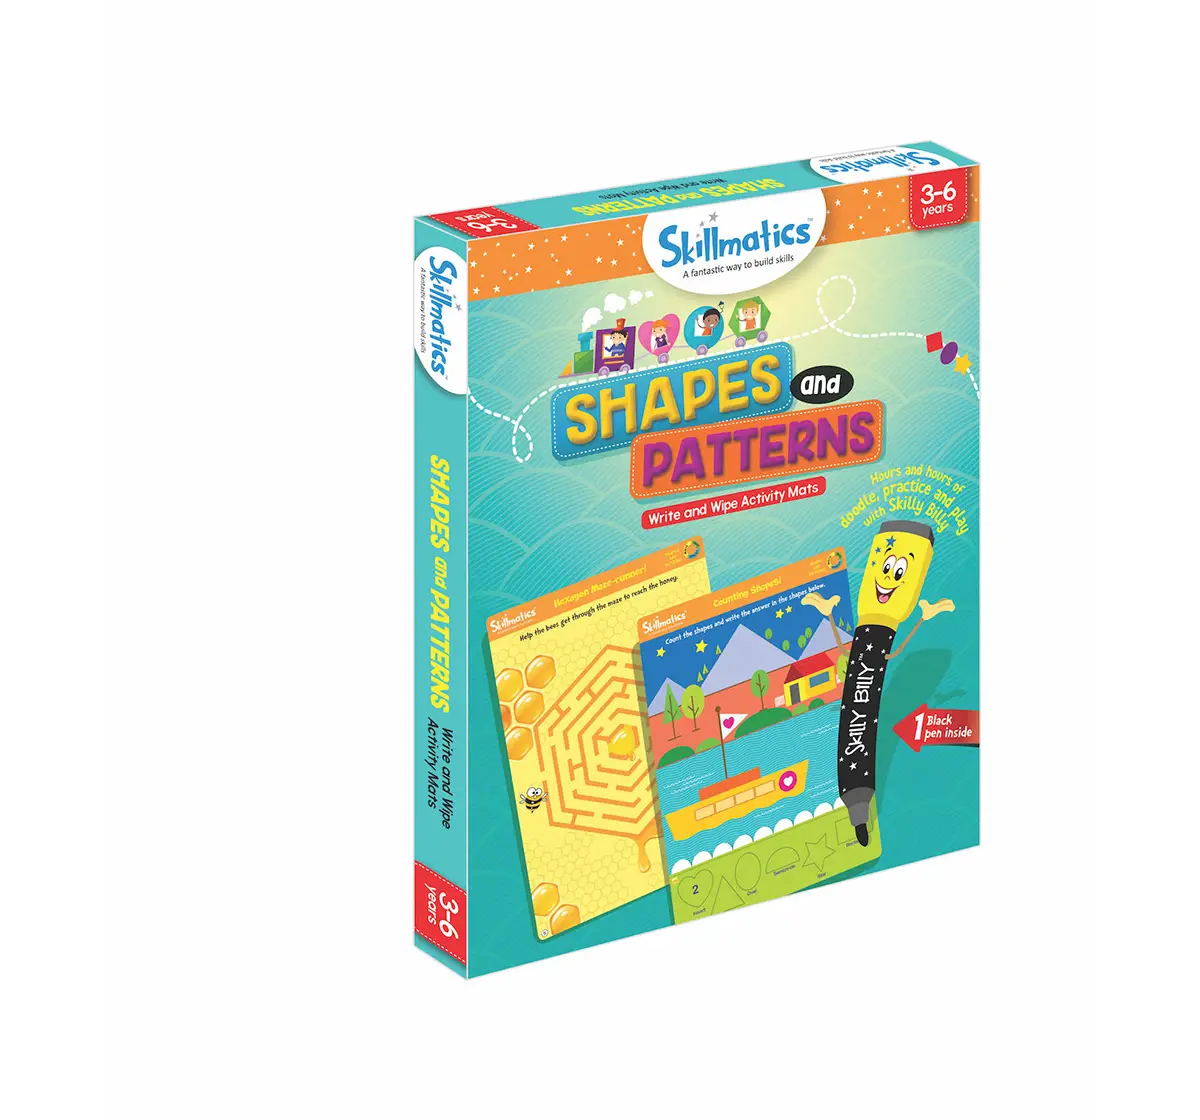 Skillmatics Shapes & Patterns Games for Kids age 3Y+ 